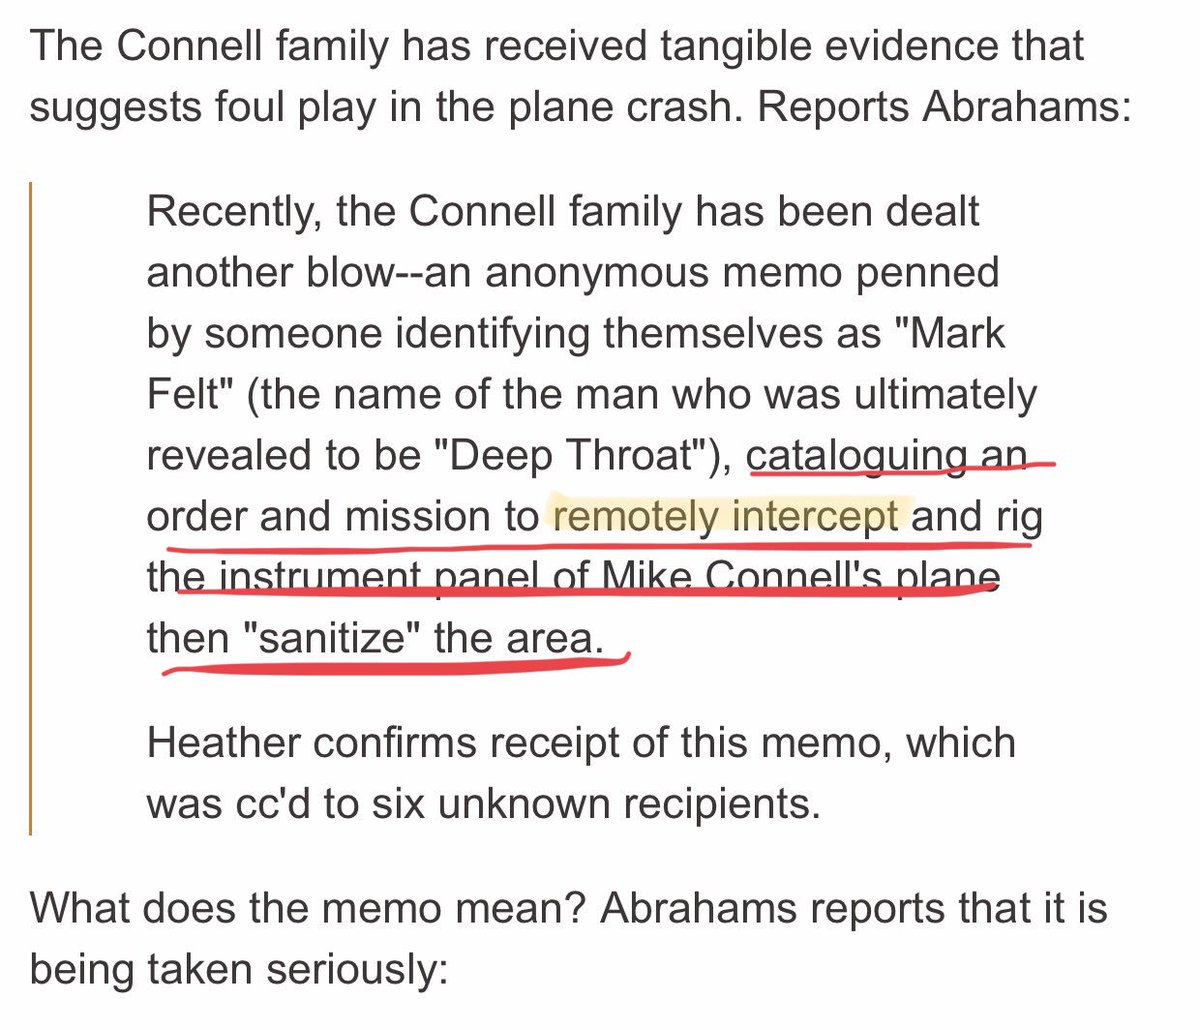 The Connell family received an anonymous memo by someone identifying themselves as "Mark Felt" AKA "Deep Throat" cataloguing an order & mission to REMOTELY intercept & rig the instrument panel of Connell's plane then "sanitize” itcc  @knowledgevendor  @DerWouter  @MingGao26